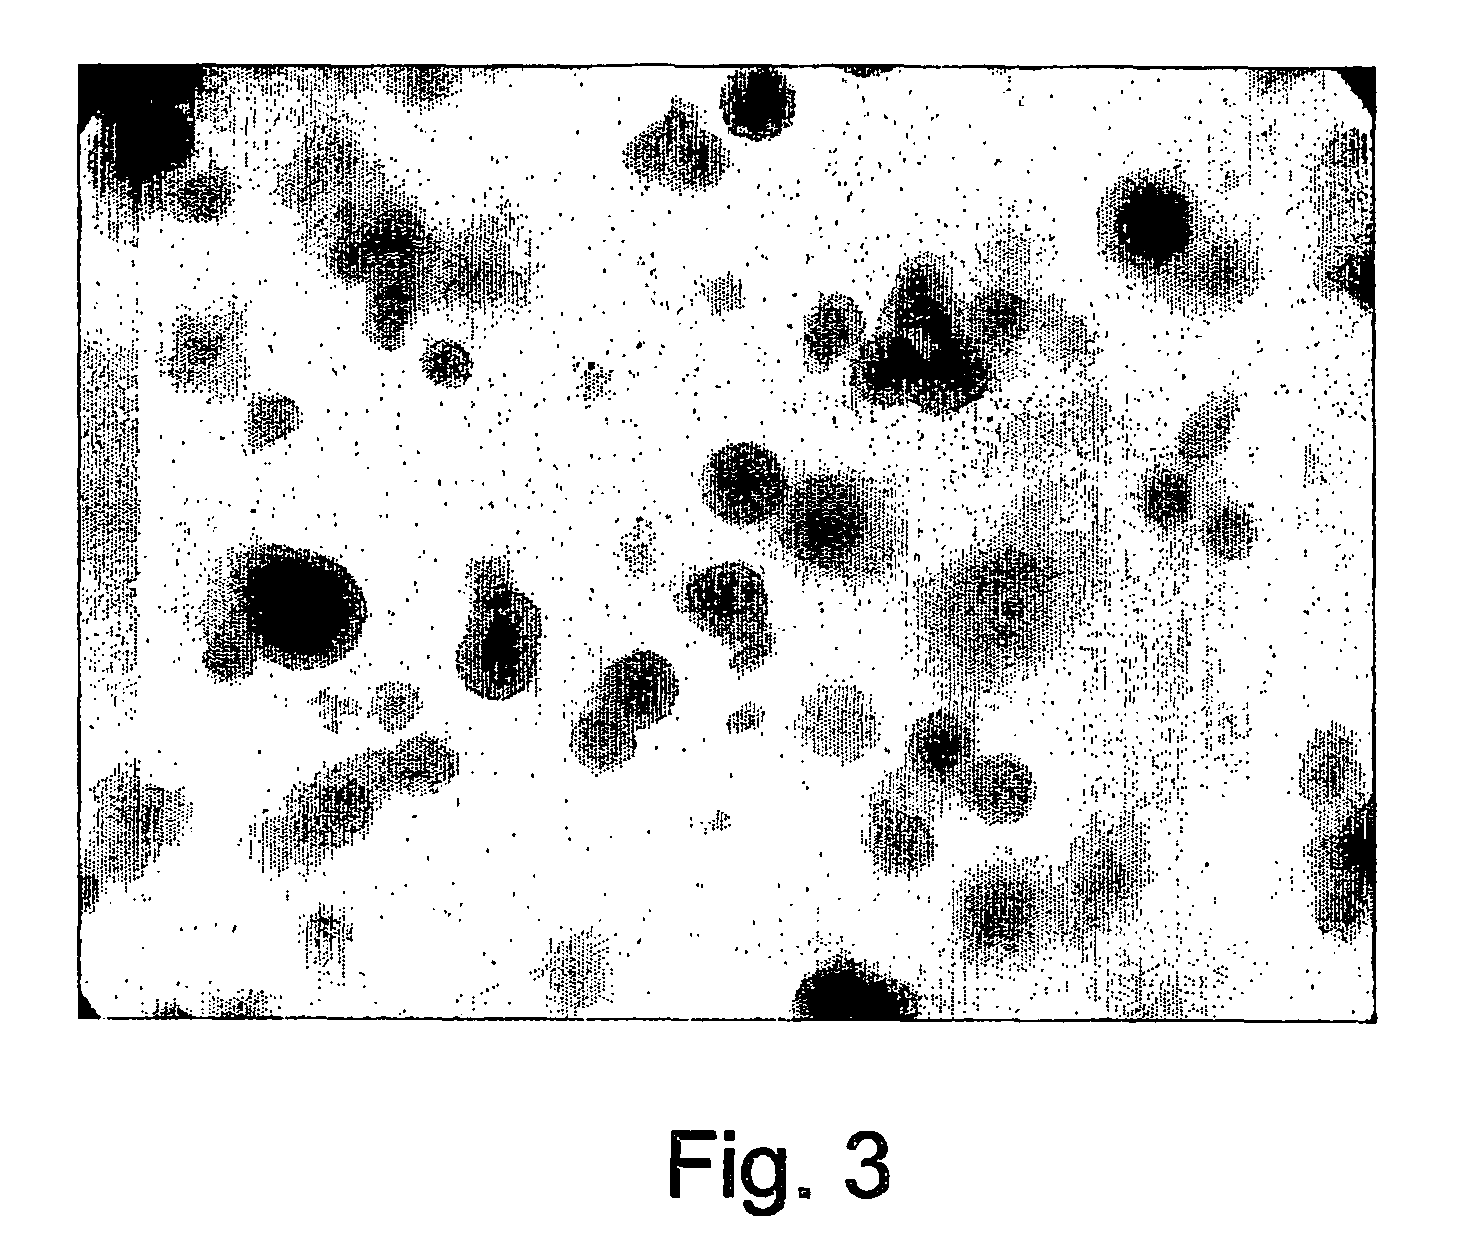 Agent-encapsulating micro- and nanoparticles, methods for preparation of same and products containing same